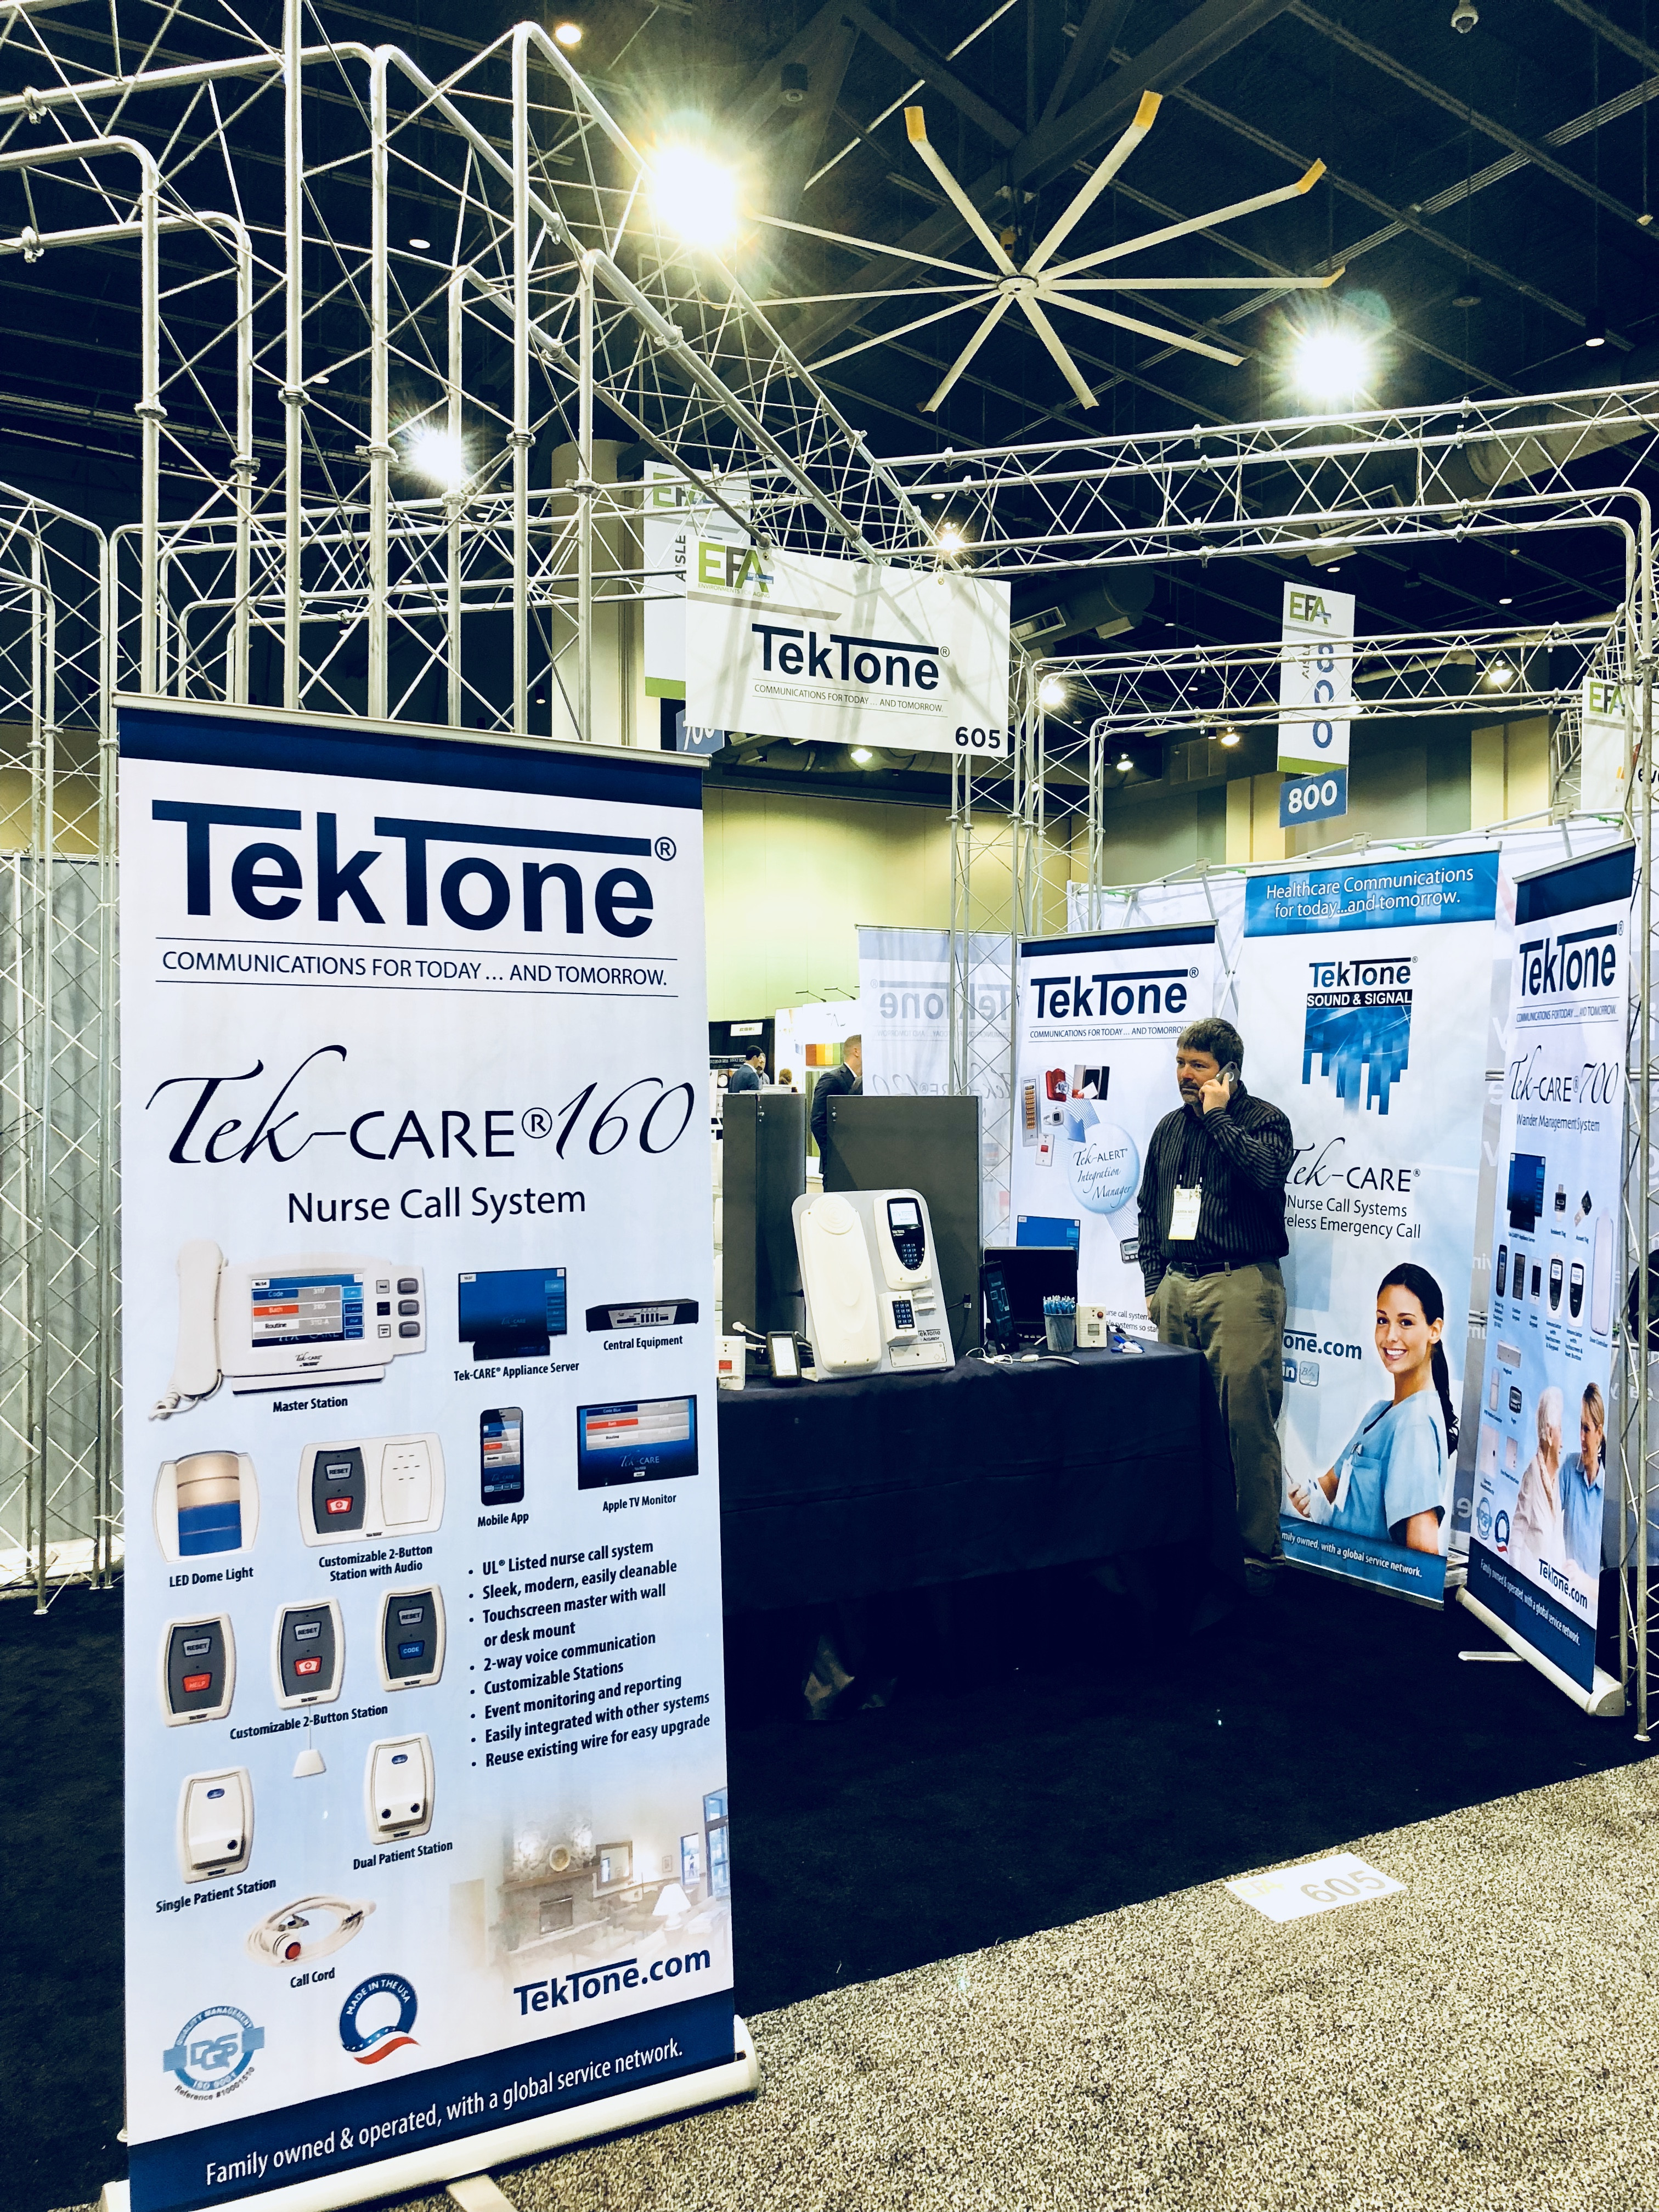 19 Elegant Engineered Hardwood Floors Charlotte Nc 2024 free download engineered hardwood floors charlotte nc of tradeshows tektone nurse call systems for the health care with environments for aging